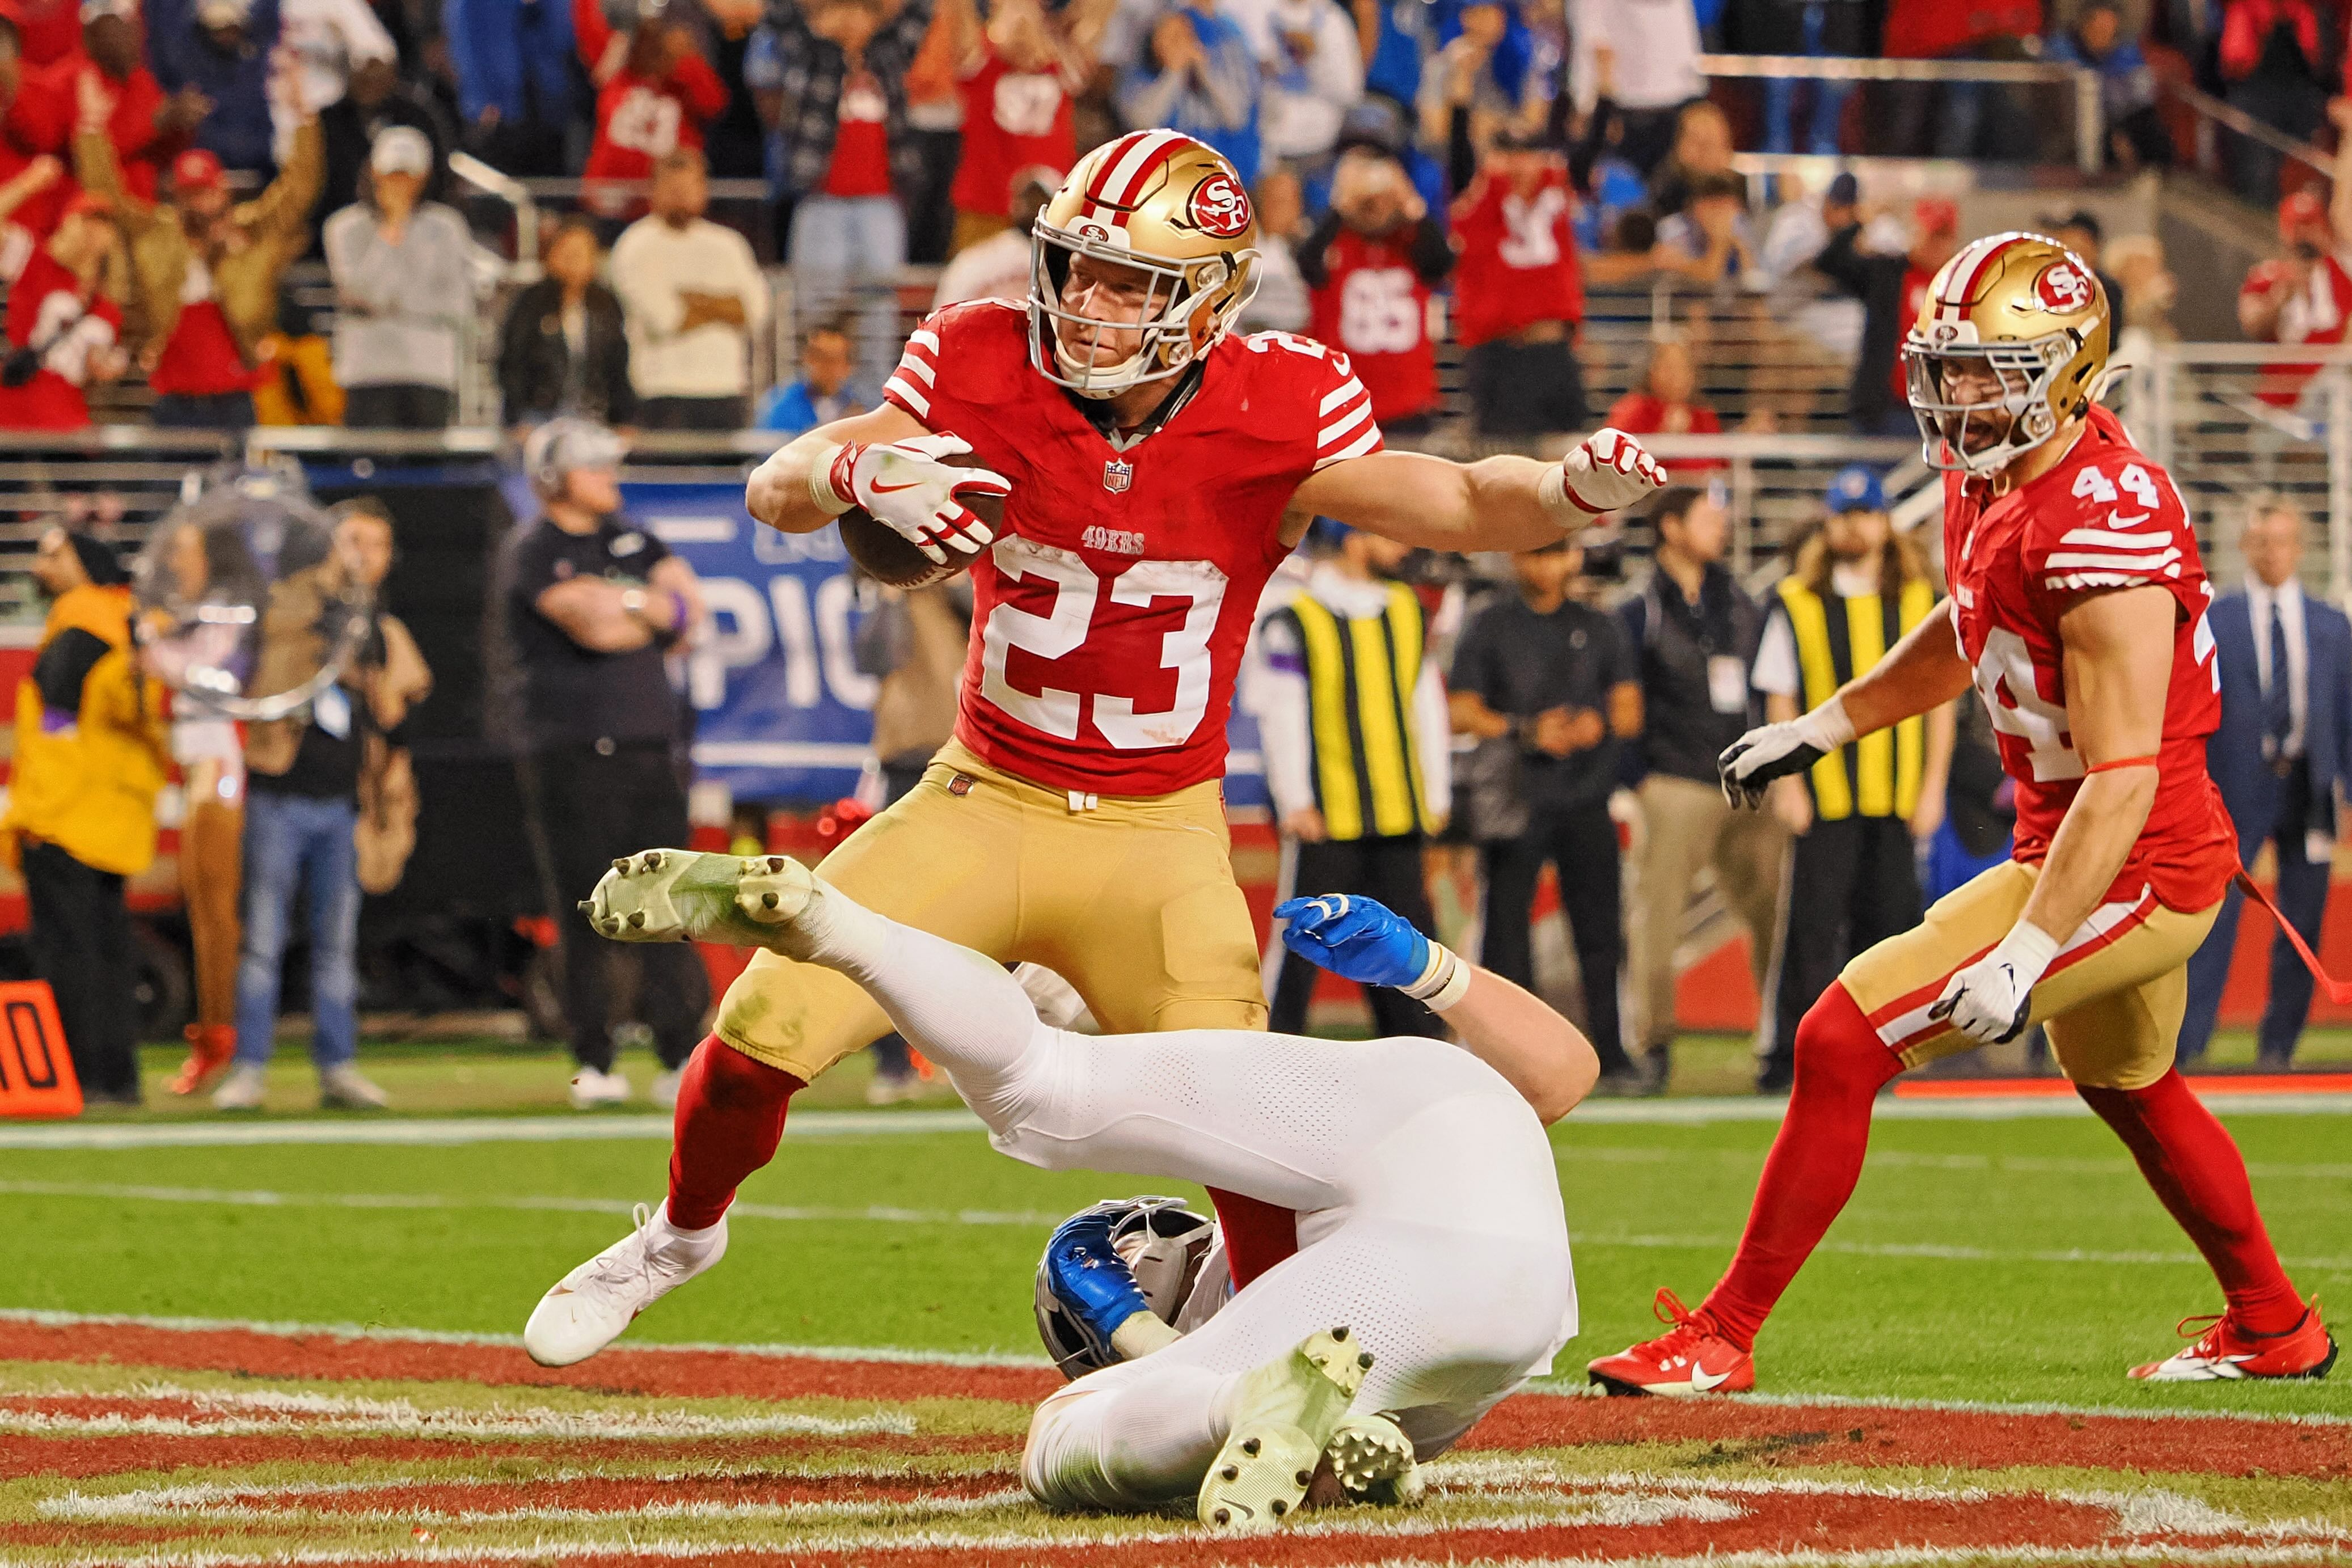 NFL 49ers storm back in second half to stun Lions, reach Super Bowl